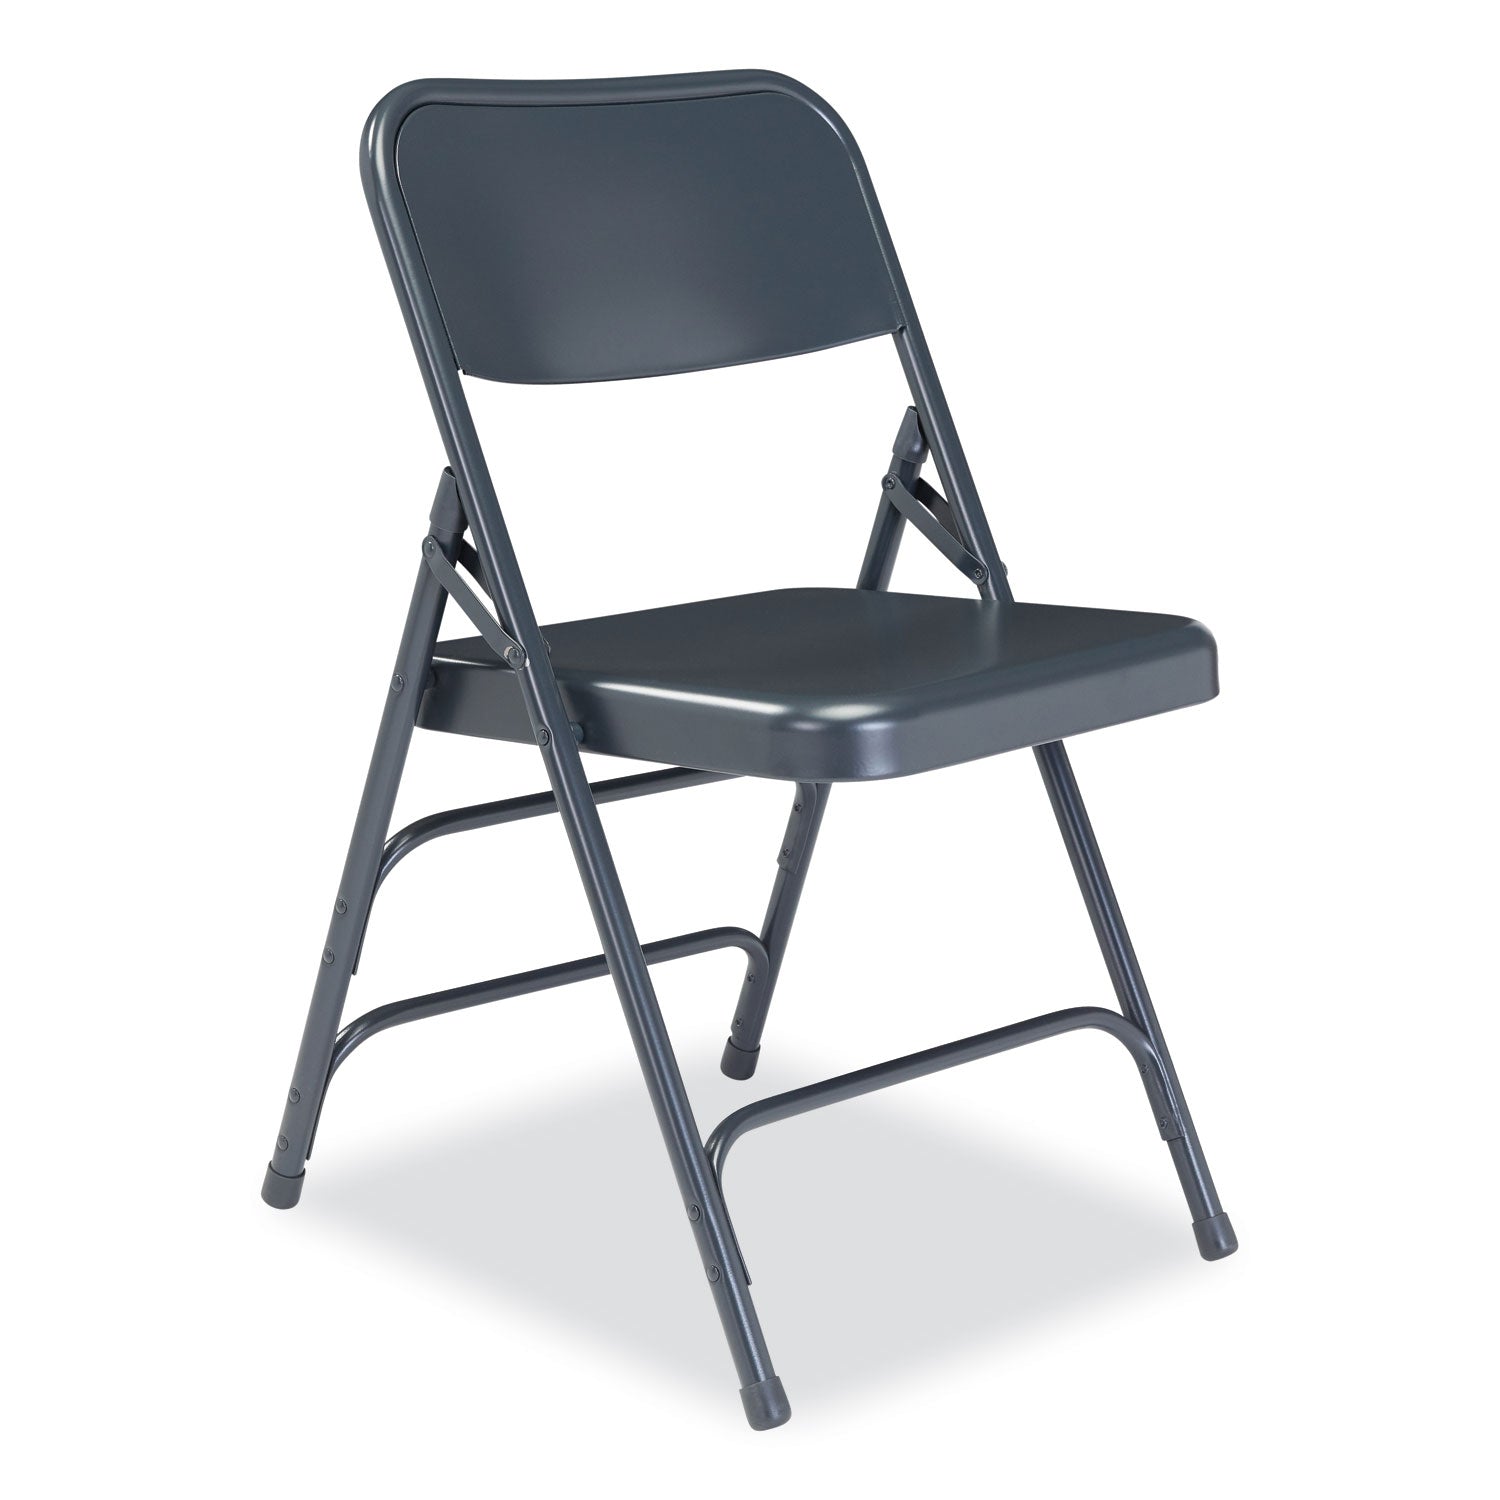 300-series-deluxe-all-steel-triple-brace-folding-chair-supports-480-lb-1725-seat-height-blue-4-ctships-in-1-3-bus-days_nps304 - 2